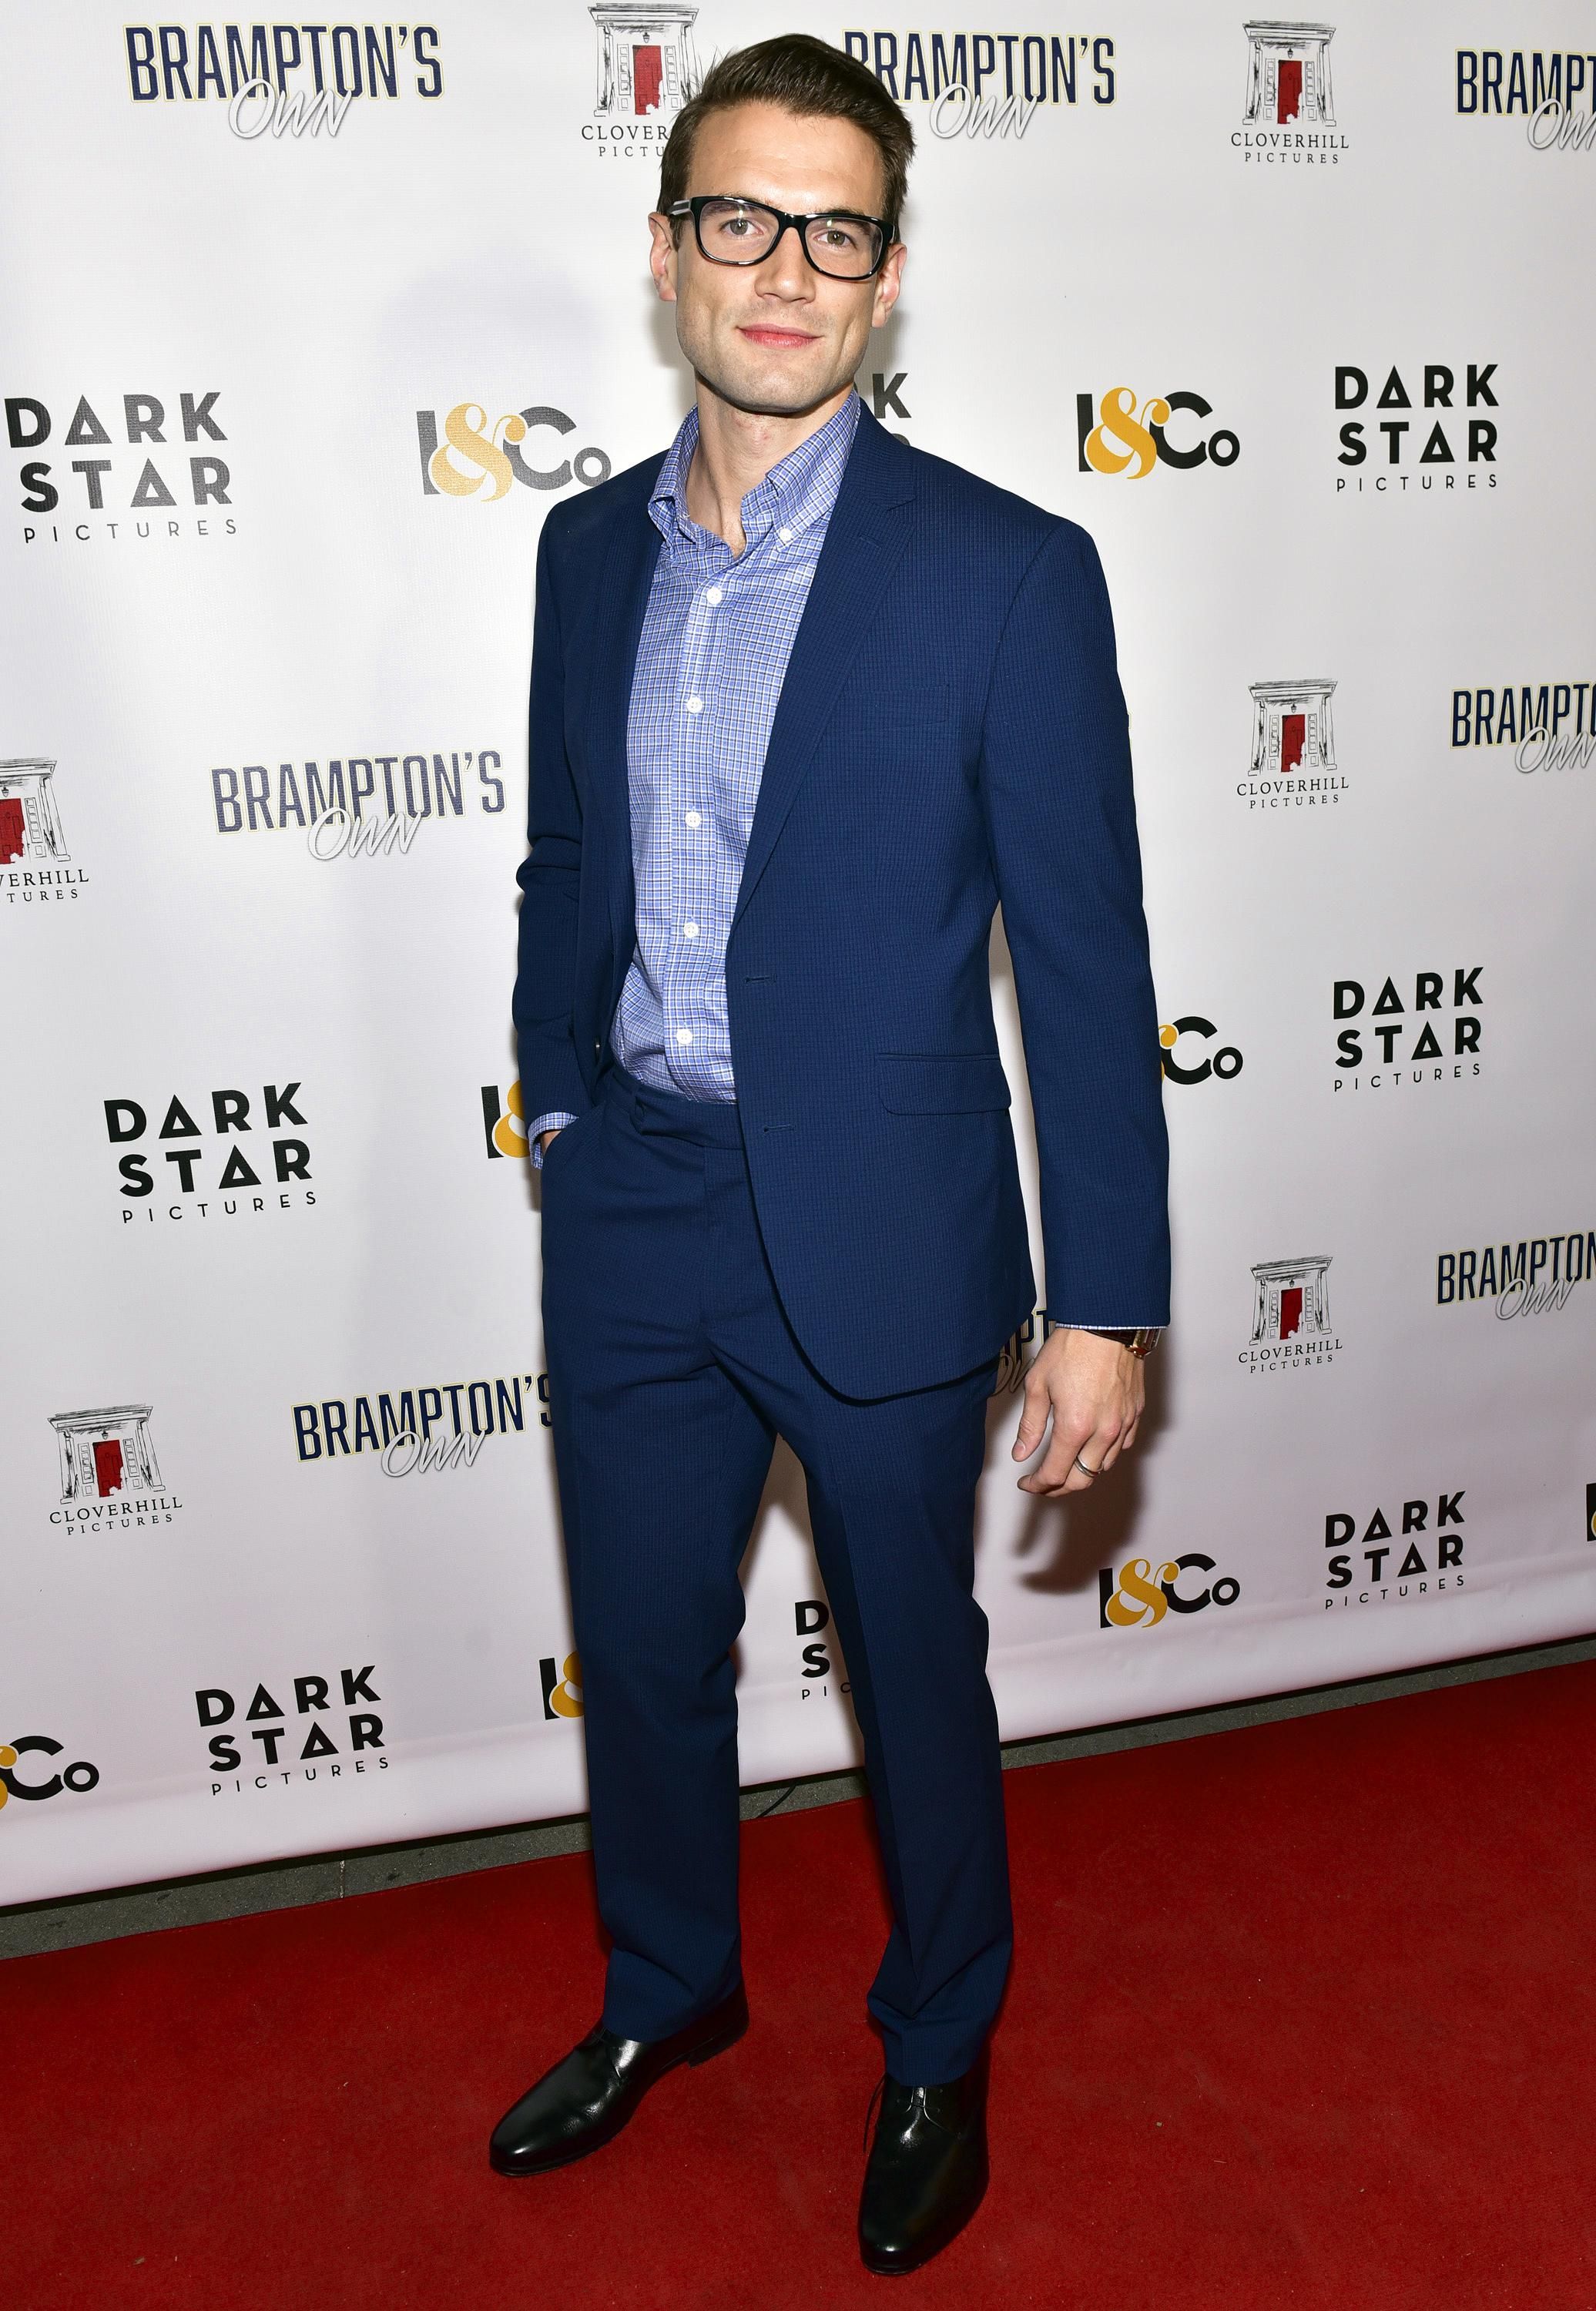 Alex Russell attends a red carpet event wearing navy blue suit and a checked blue shirt open at the collar